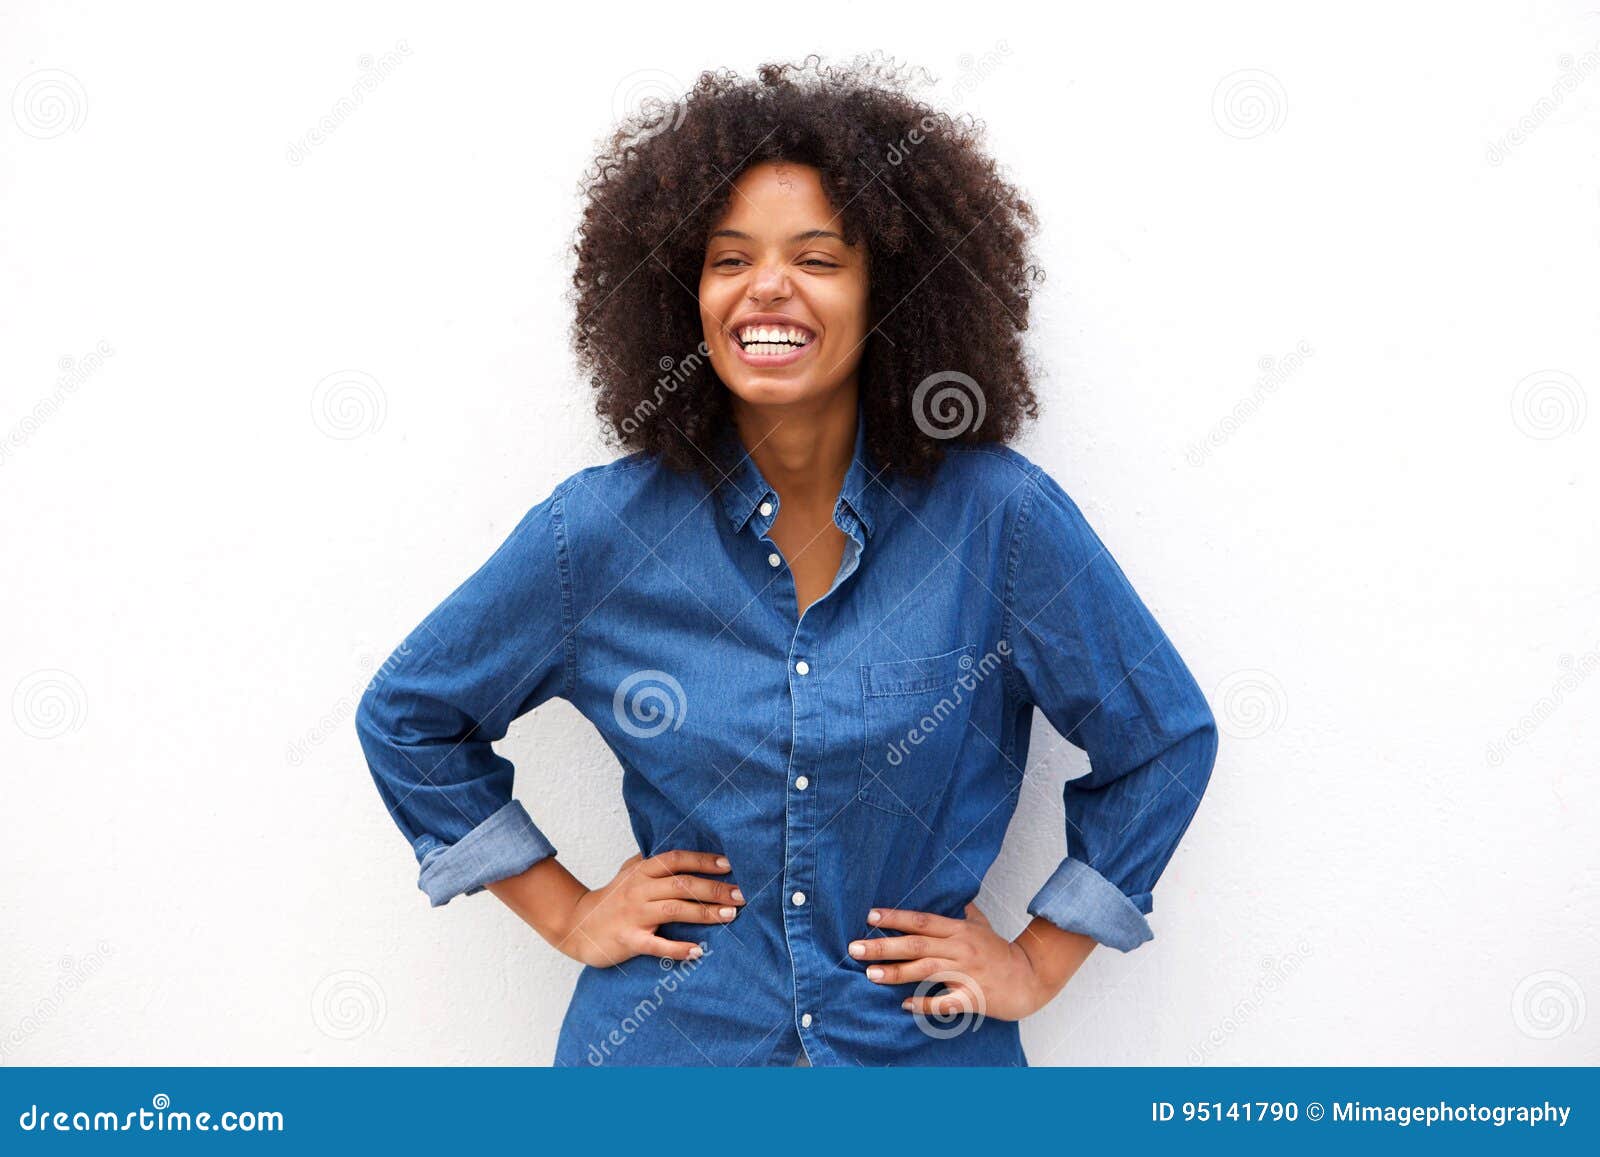 friendly woman smiling on  white background